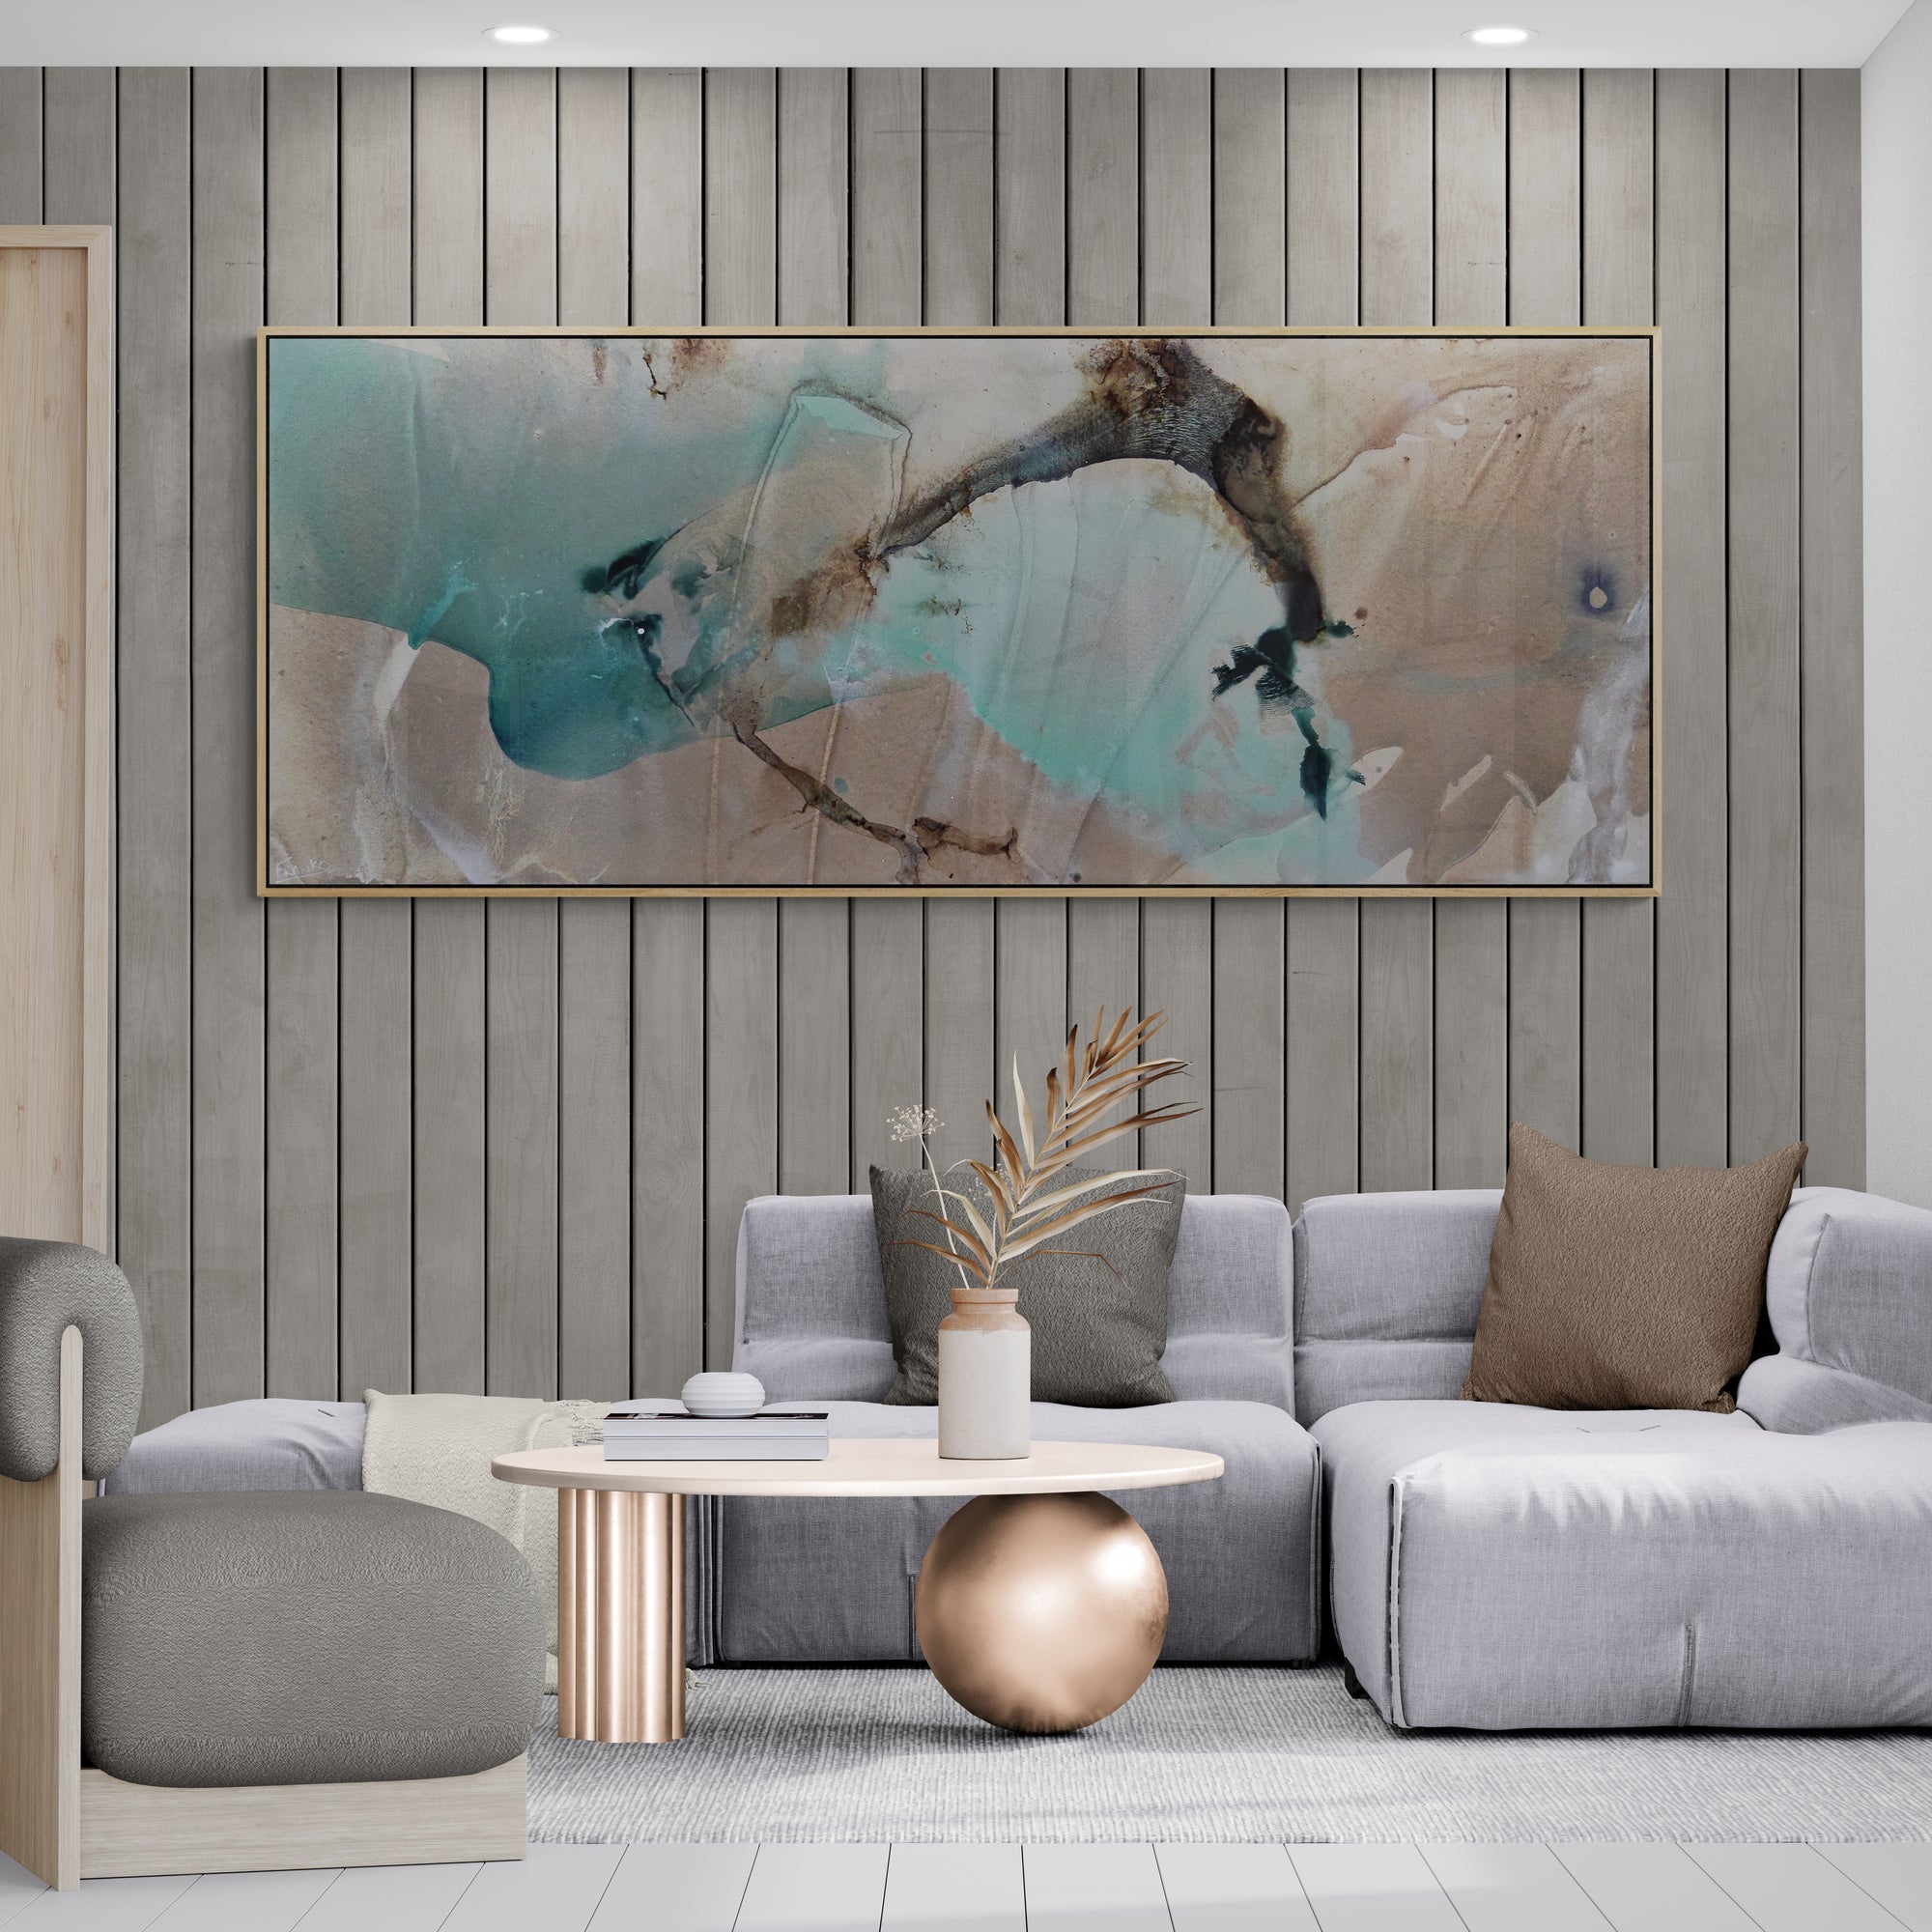 Refined 117 200cm x 80cm Cream Teal Rust White Grey Blended Abstract Painting